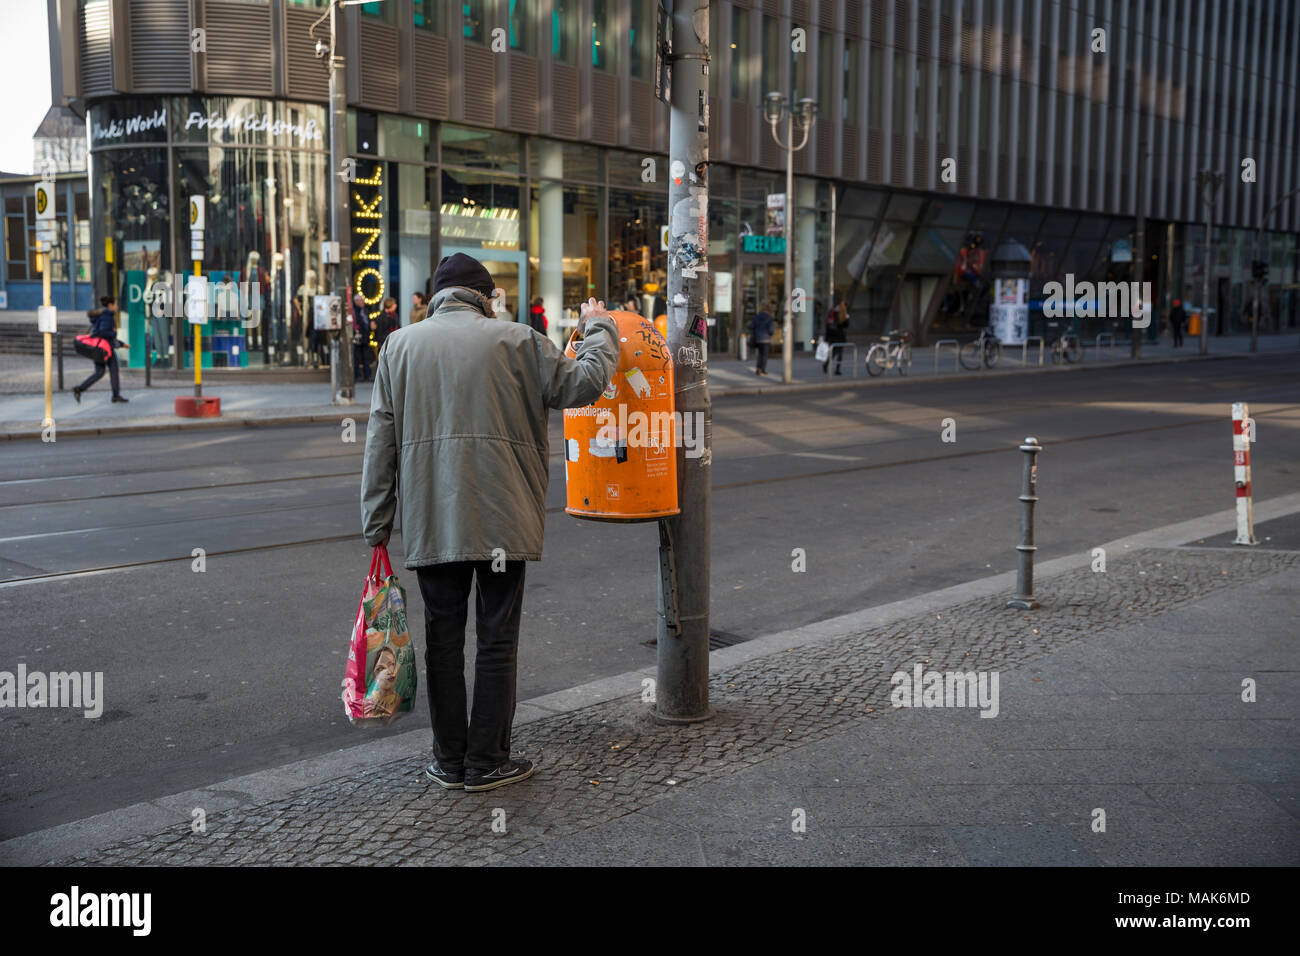 A man taking something out of a bin in Berlin, Germany. Stock Photo